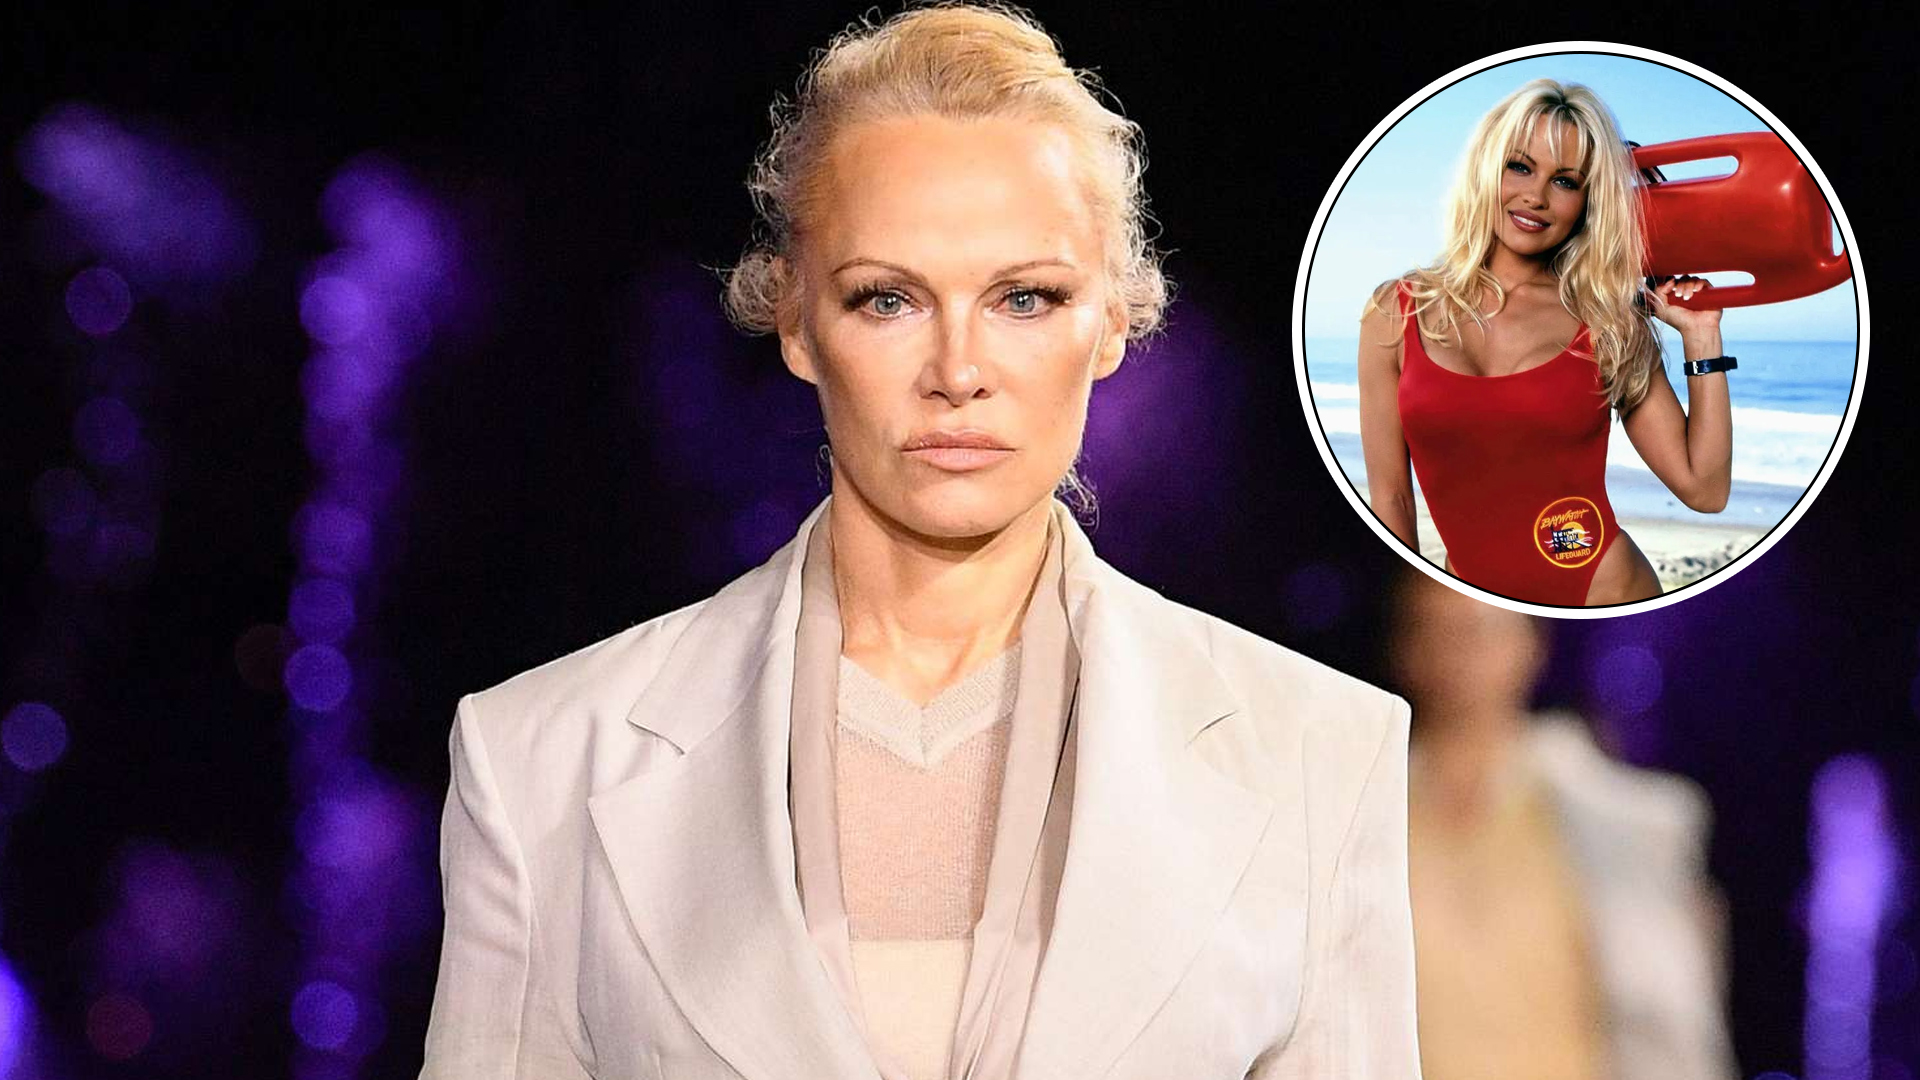 Pamela Anderson To Sell Her Old Clothes.